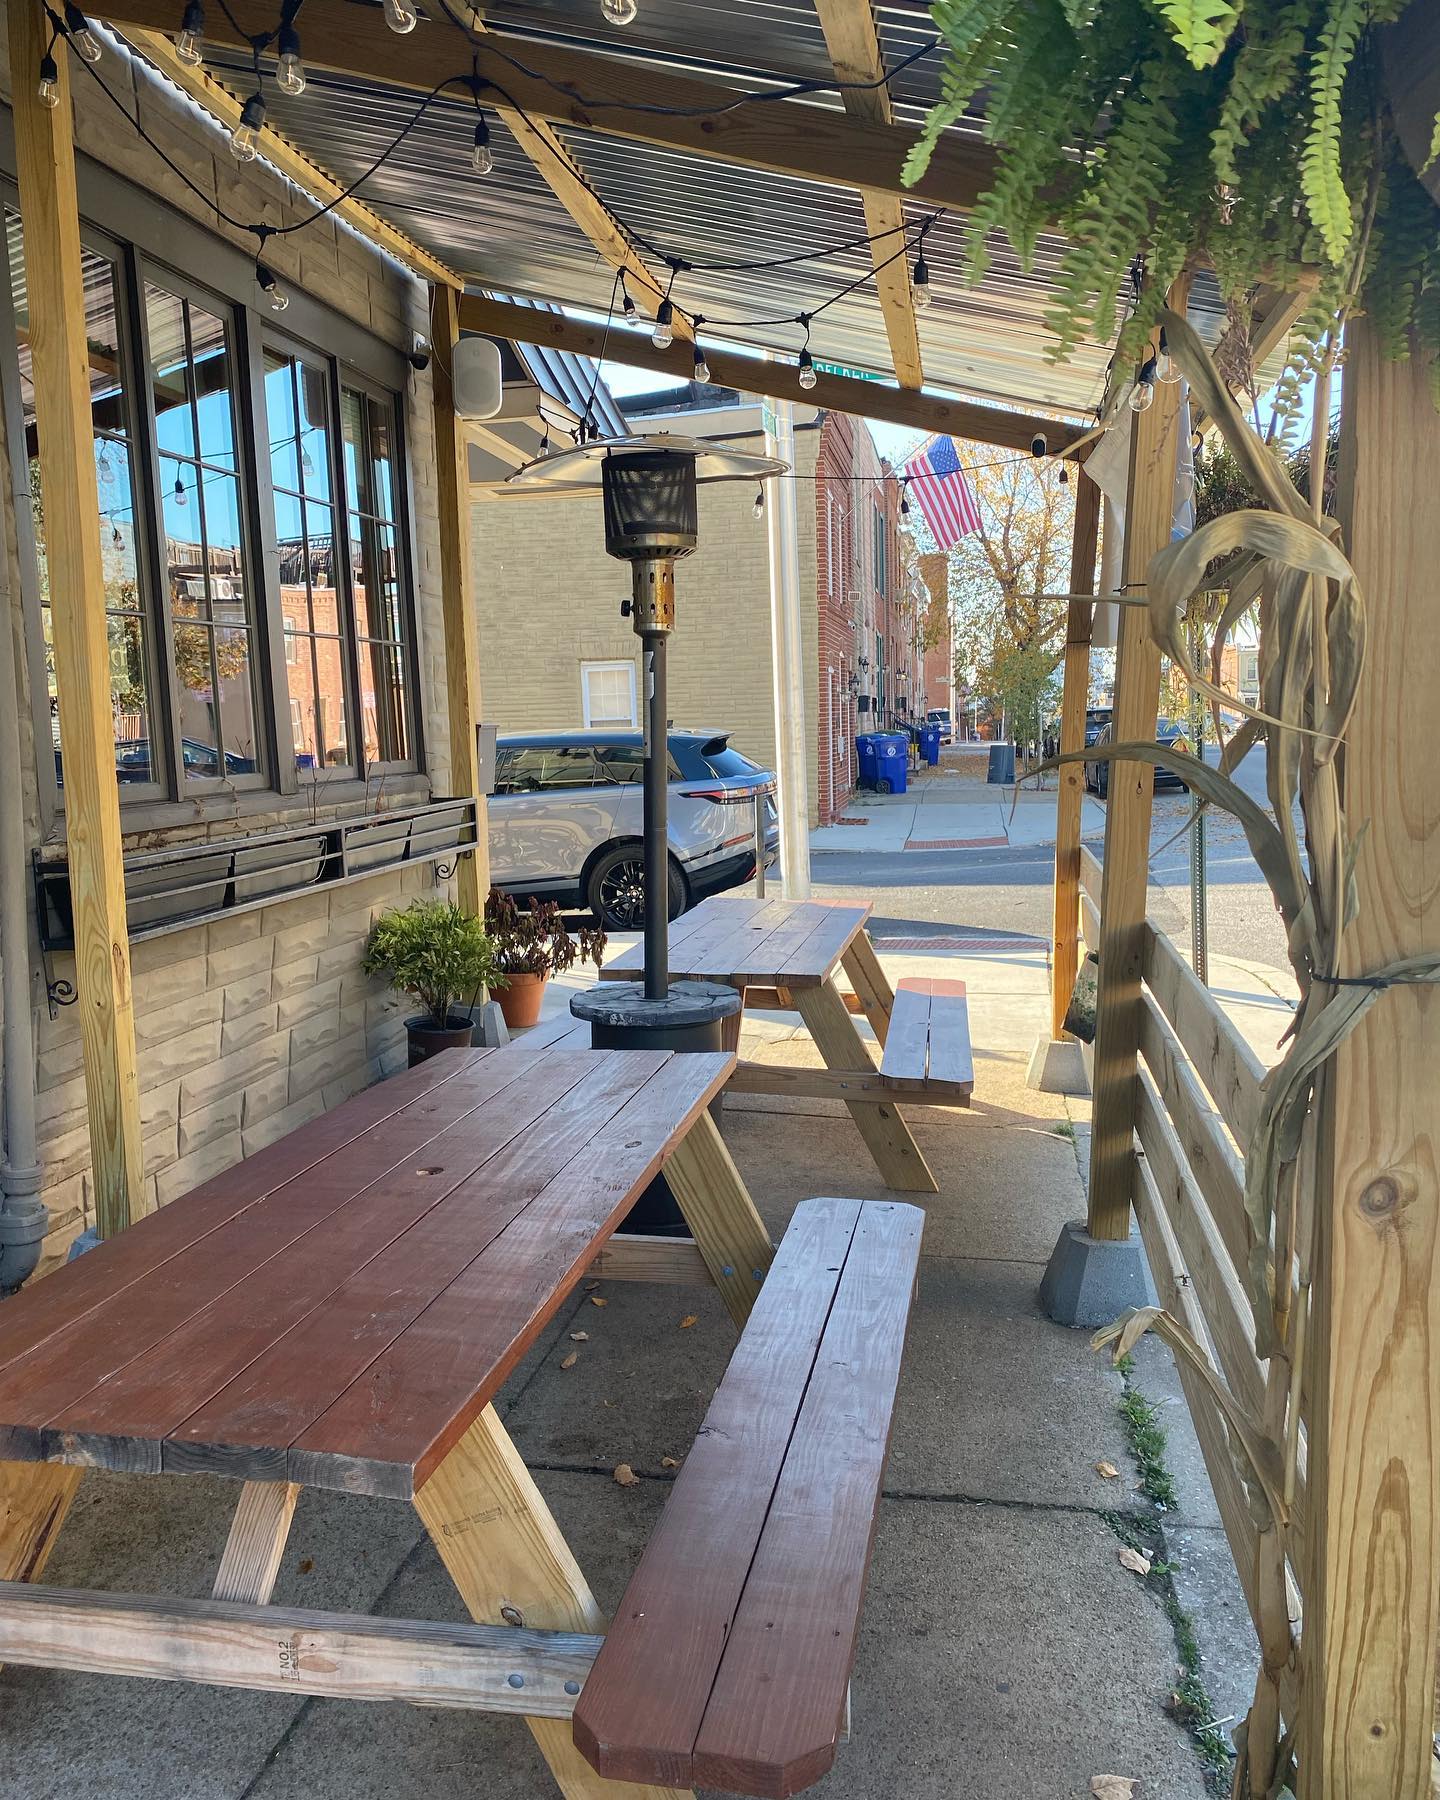 Exterior tables at The Canton Local